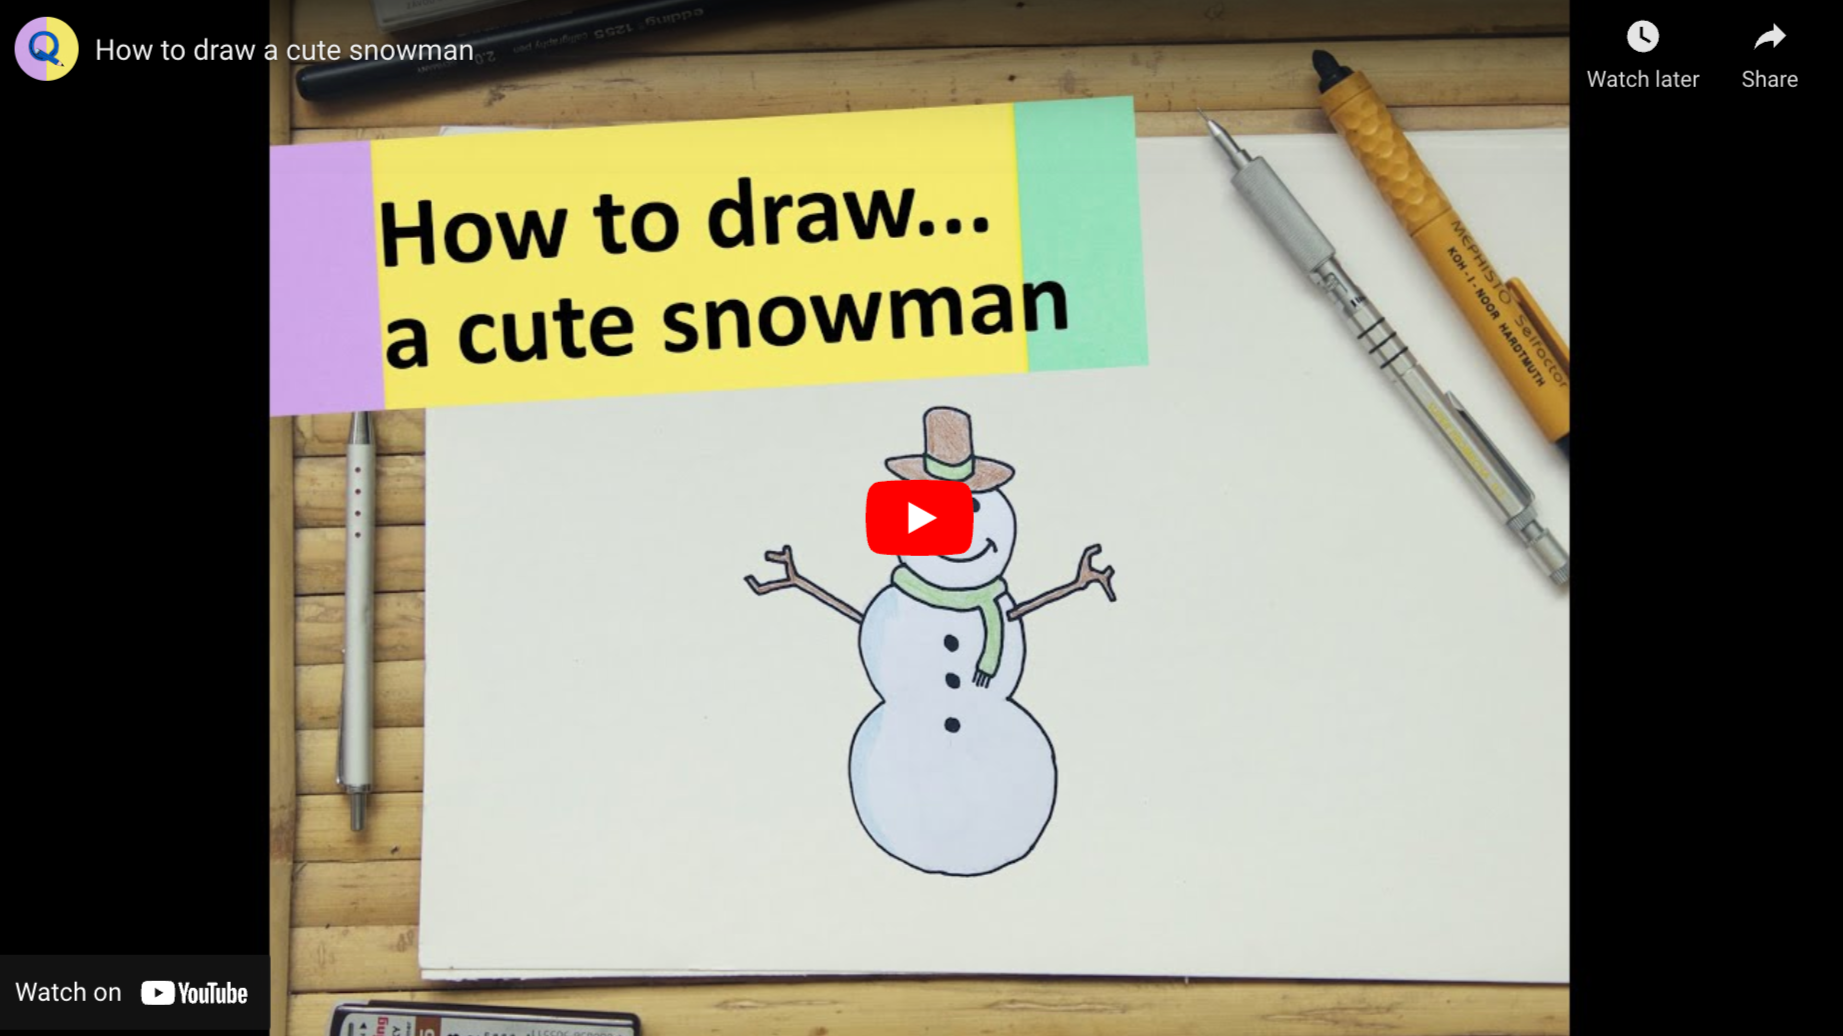 How to Draw A Snowman - Made with HAPPY